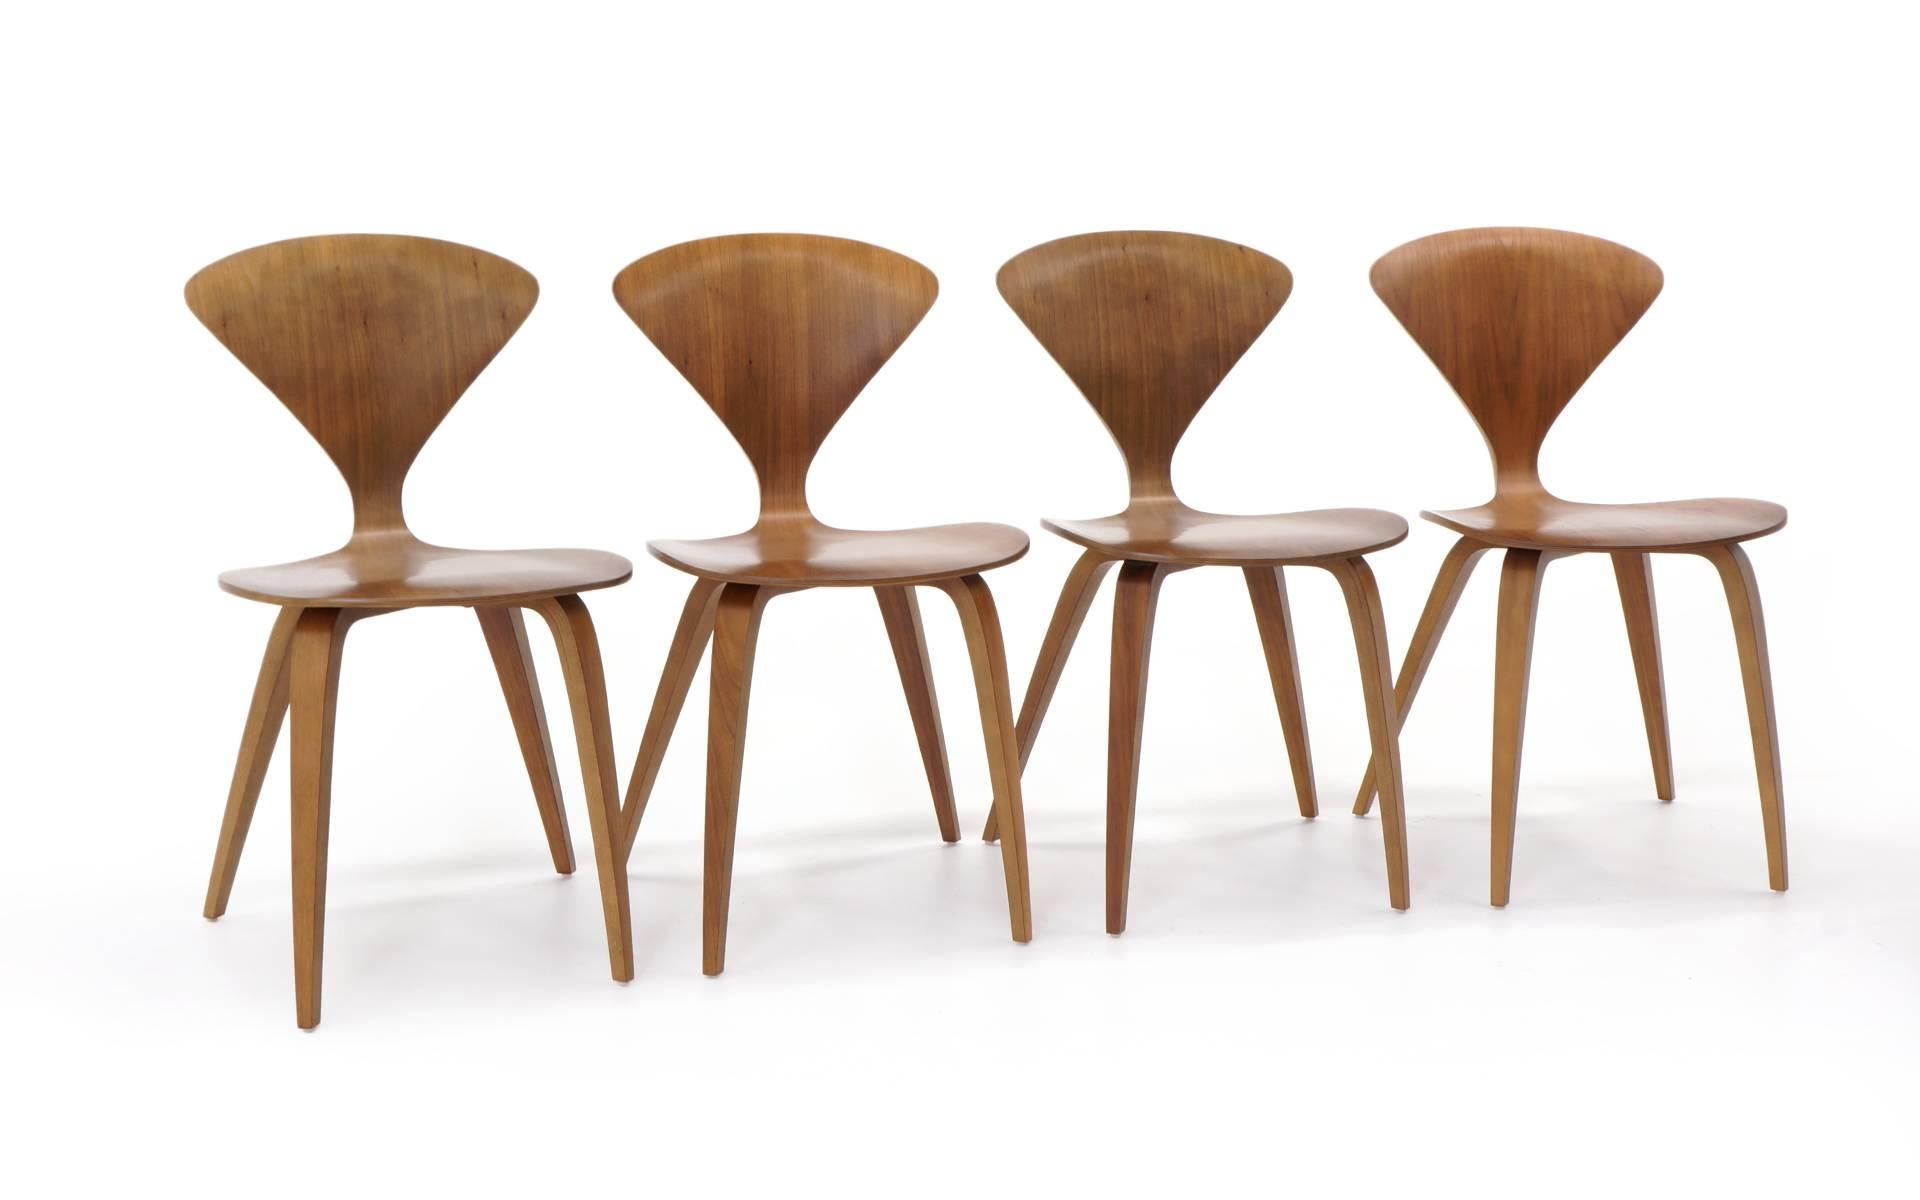 Set of six Cherner chair is walnut. Licensed production and only a few years old. Side chair dimensions are down the page.
Armchair dimensions:
Width 26.
Depth 18.75.
Height 31.25.
Seat height 17.25.